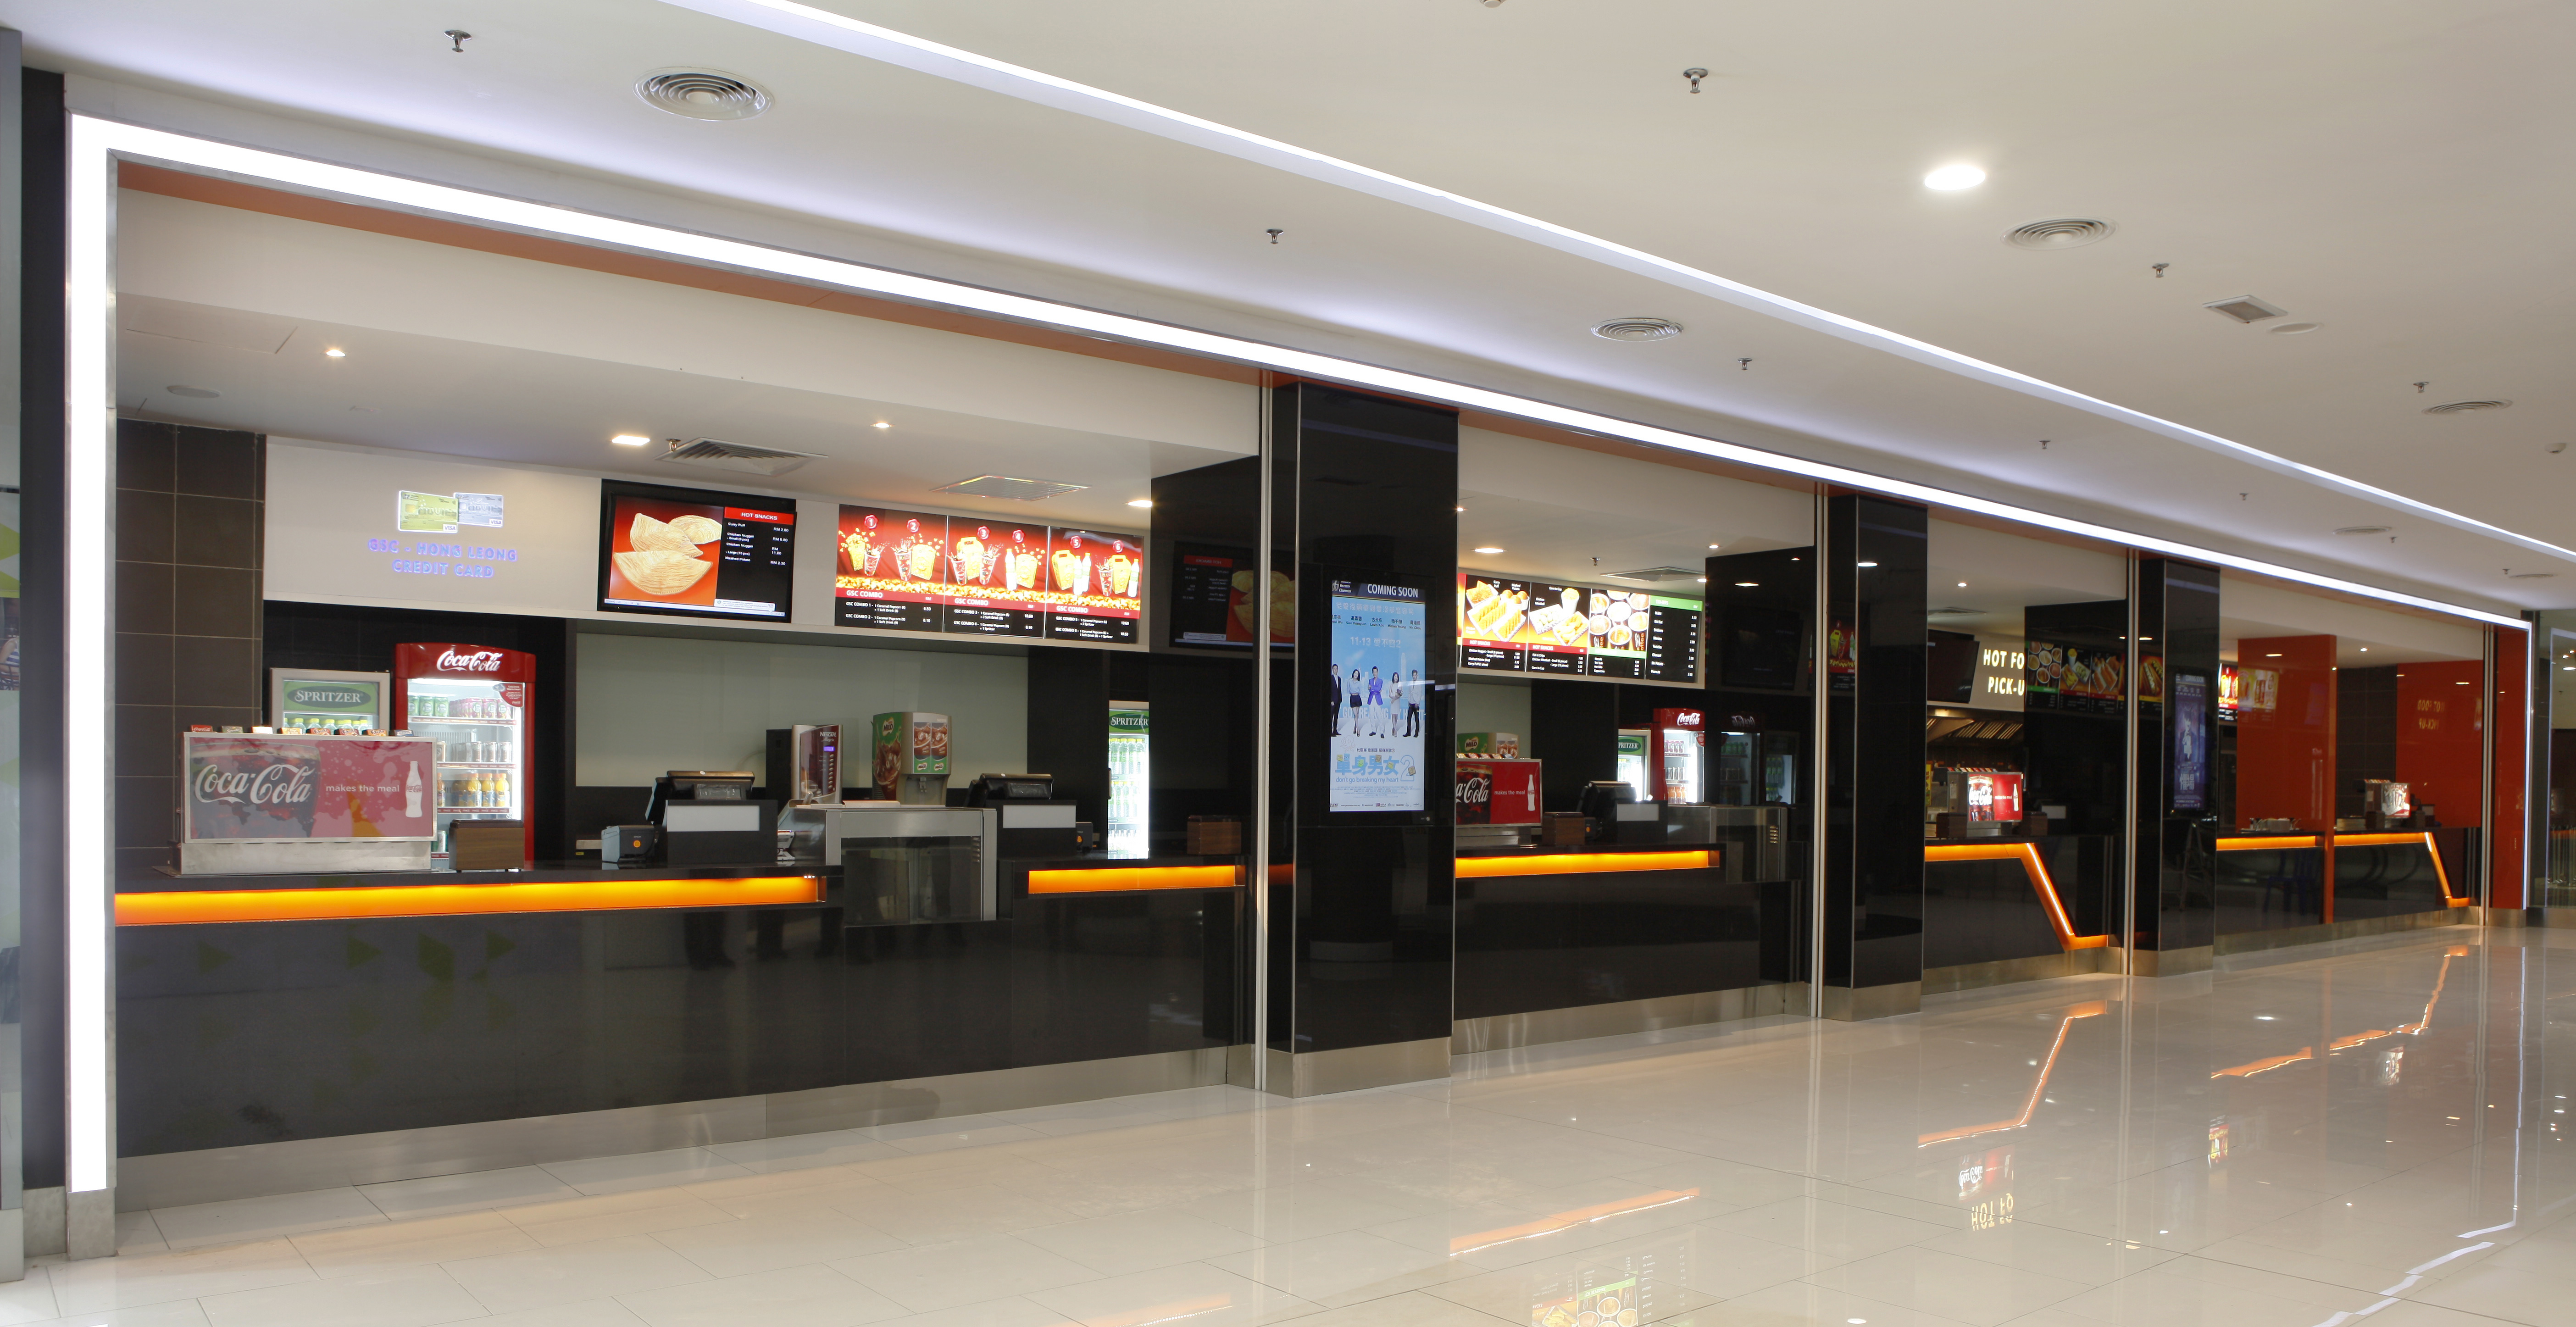 #GSC: Swanky Quill City Mall Cinema Launched! | Hype Malaysia